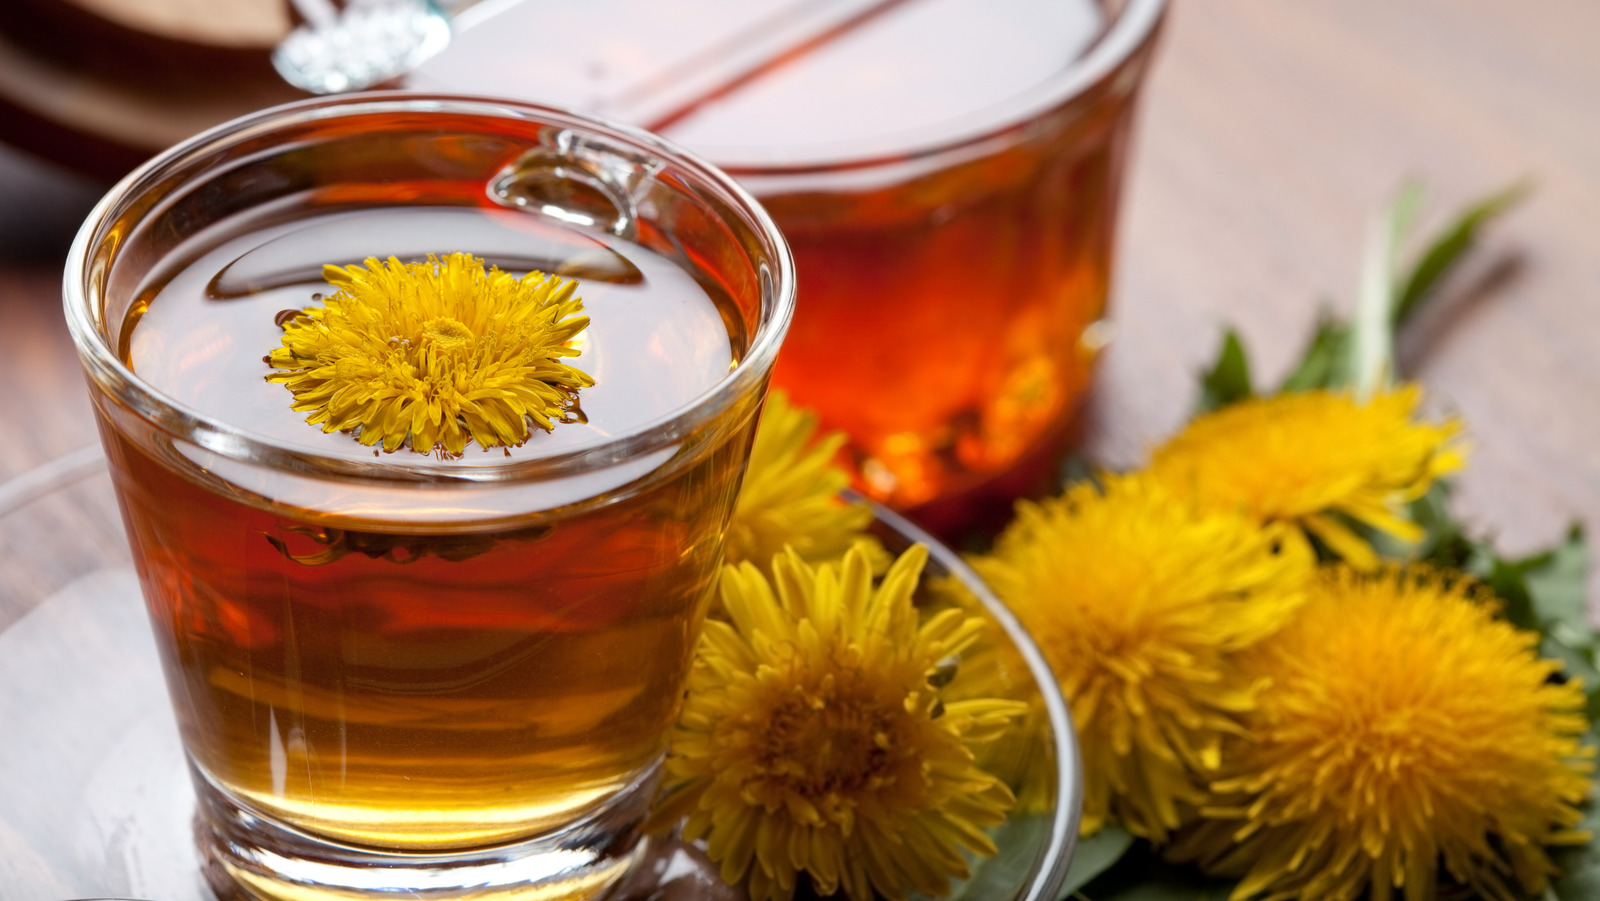 When You Drink Dandelion Tea Every Day This Is What Happens To Your Body 